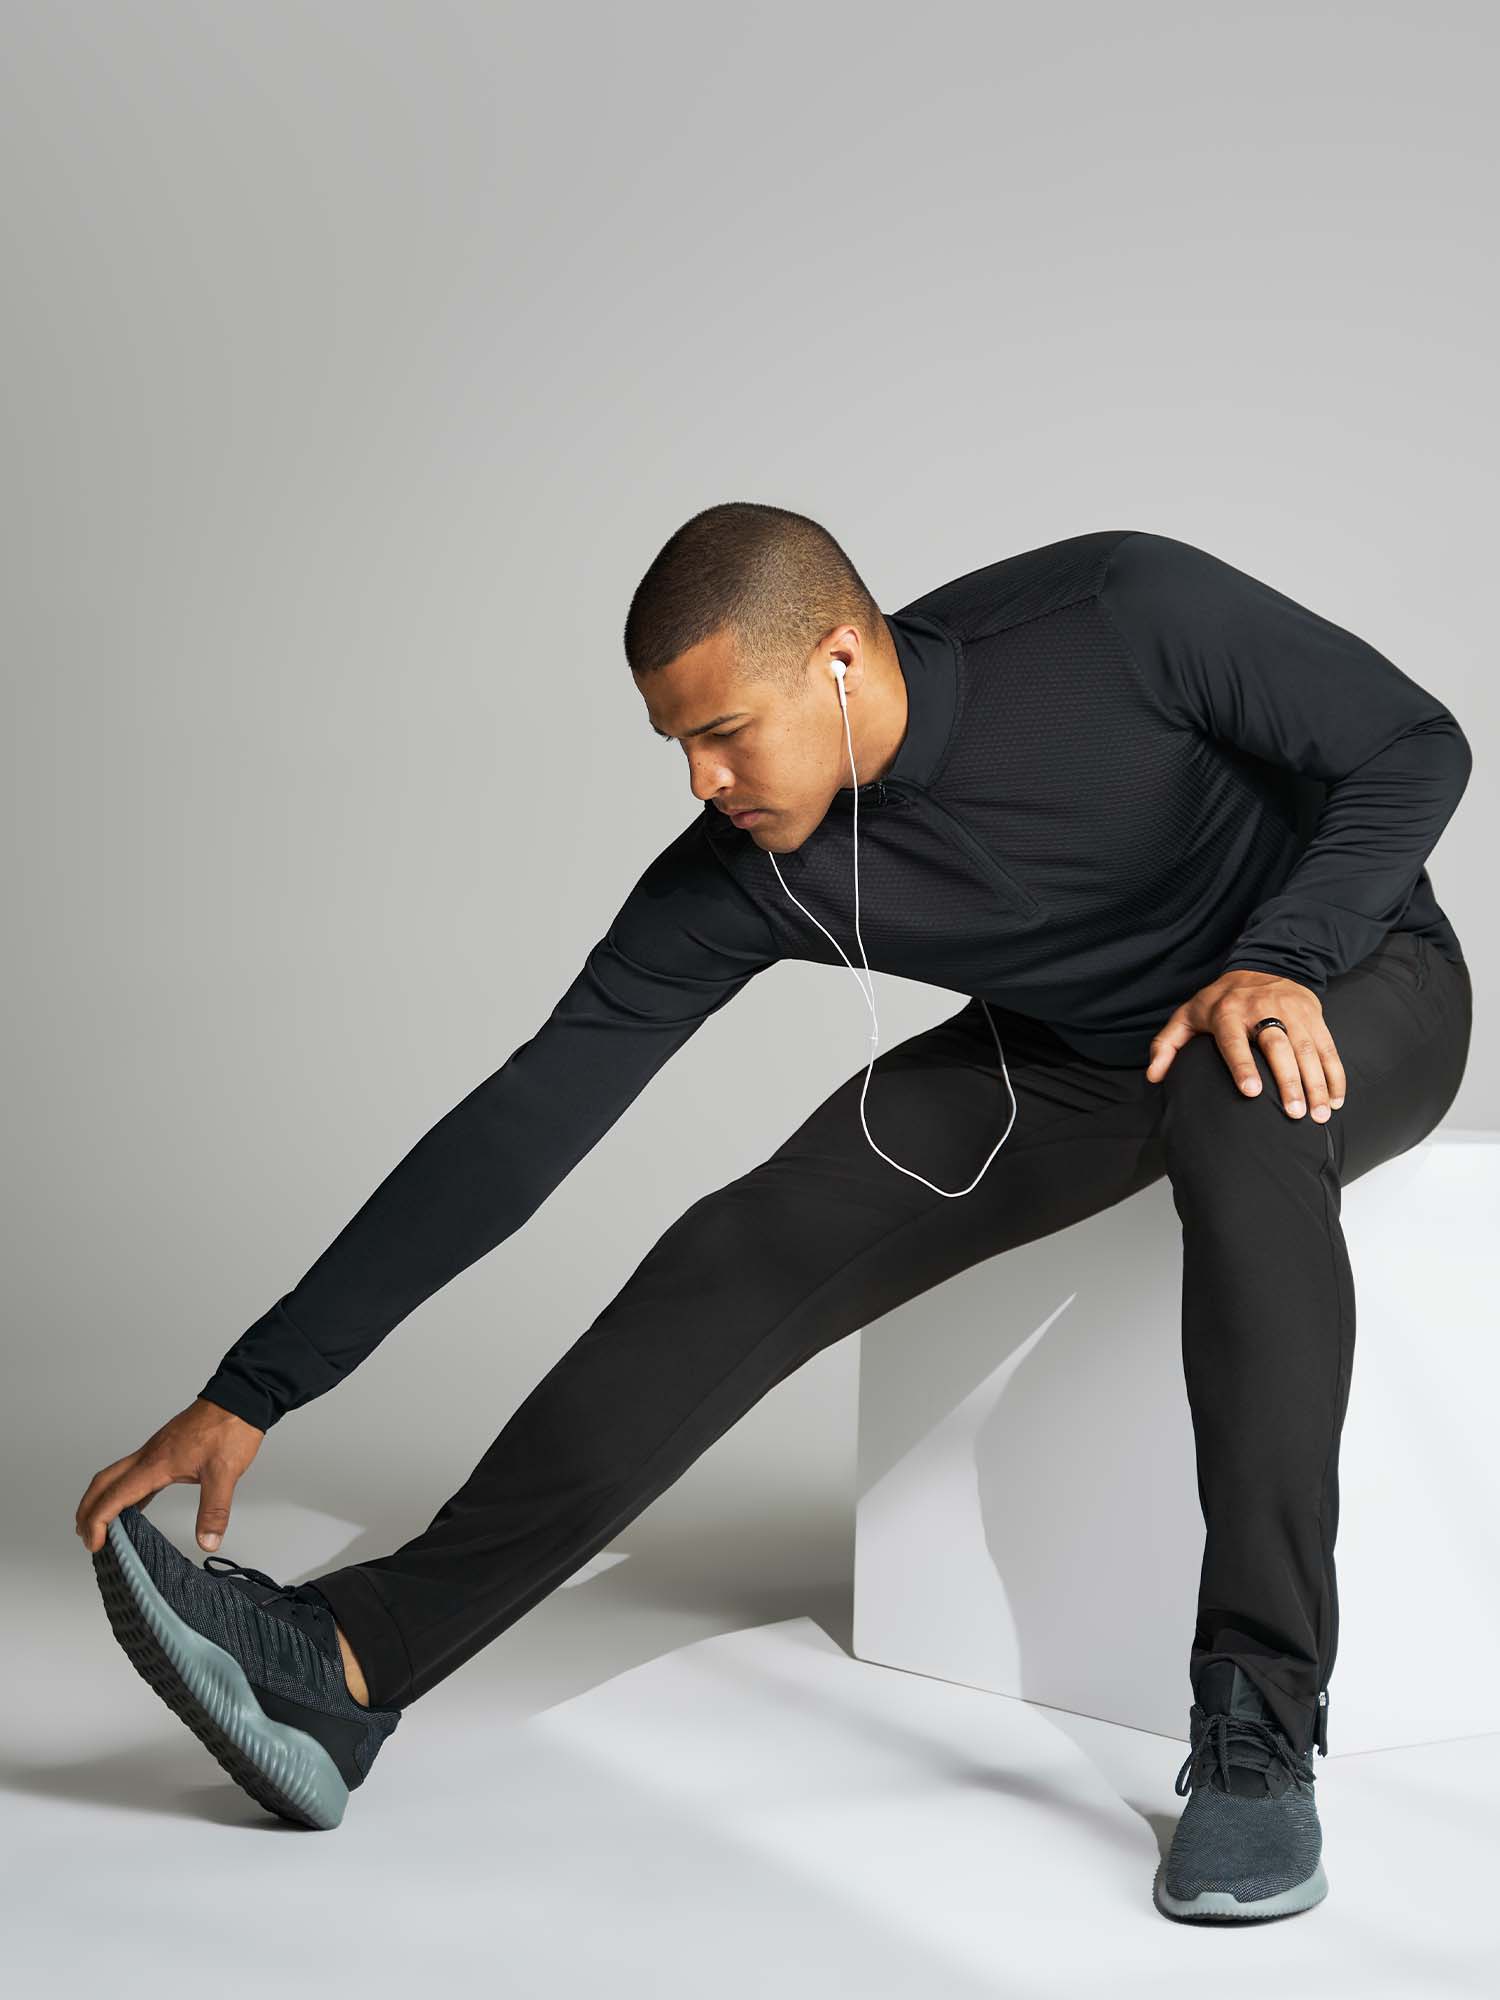 Tall man sitting on a block stretching his leg while wearing a black athletic track suit and running shoes